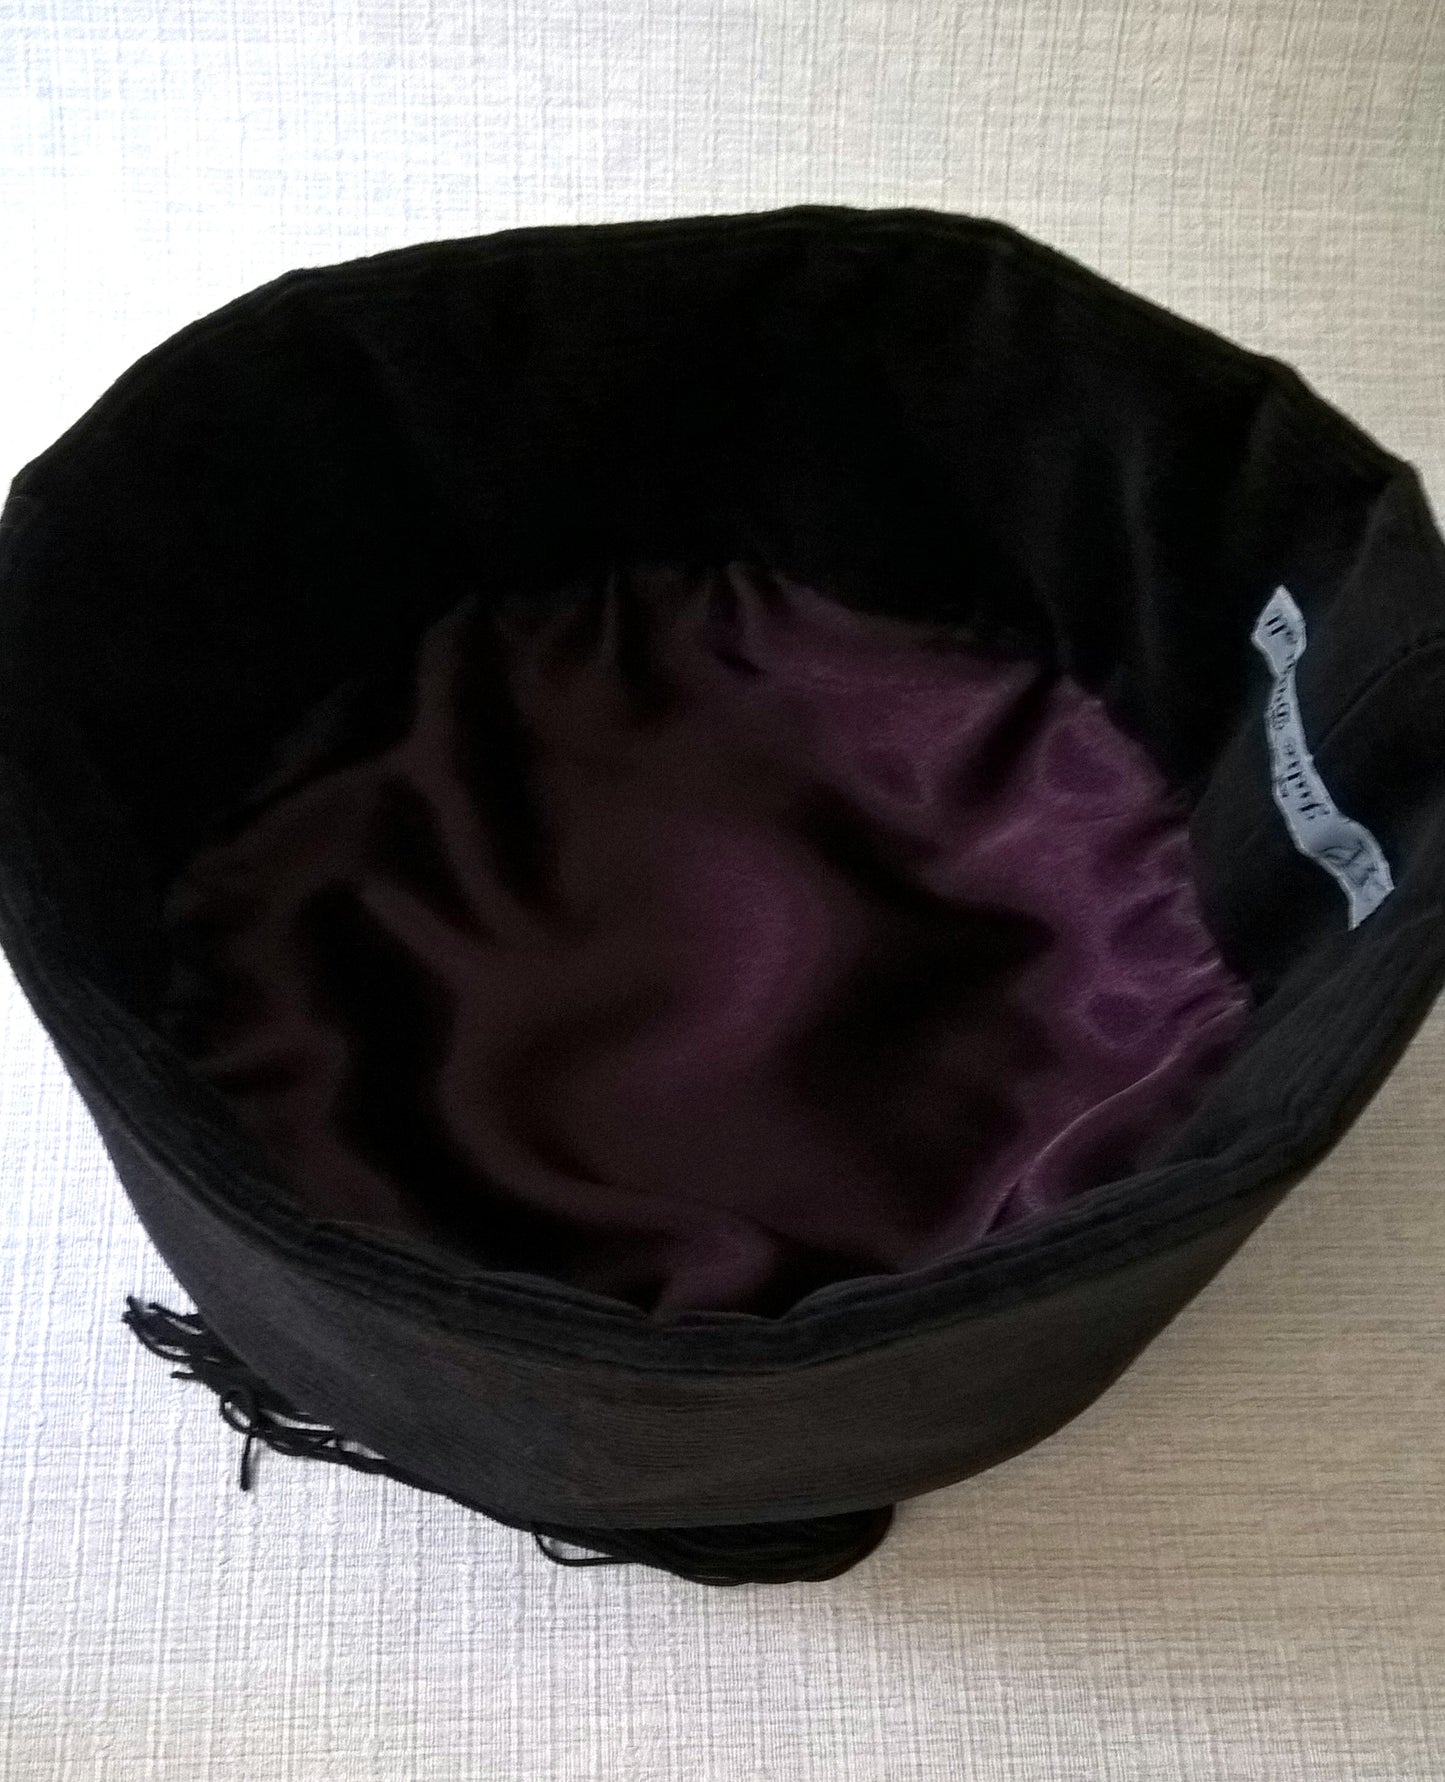 The interior of the smoking cap is hand-finished with a satin lining